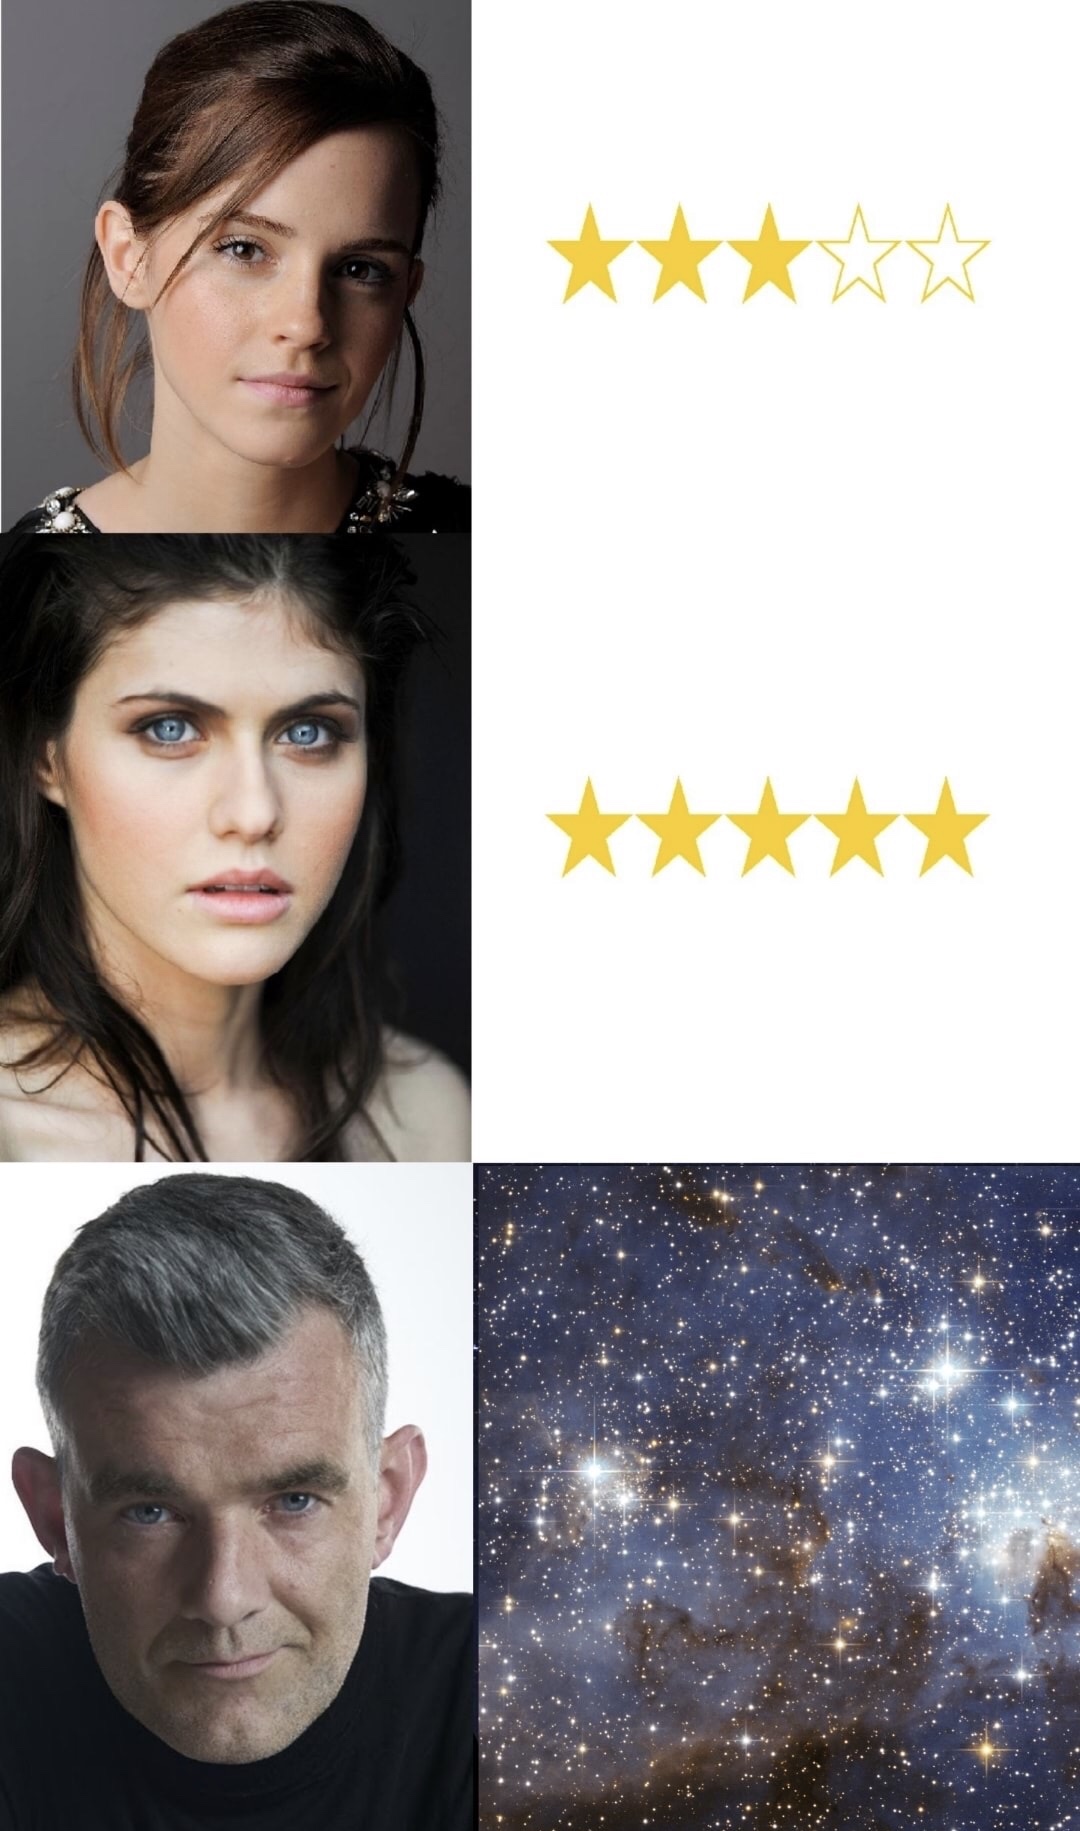 Rating of 2, stars, then 5 stars, then Stefan Karl and it is all the stars